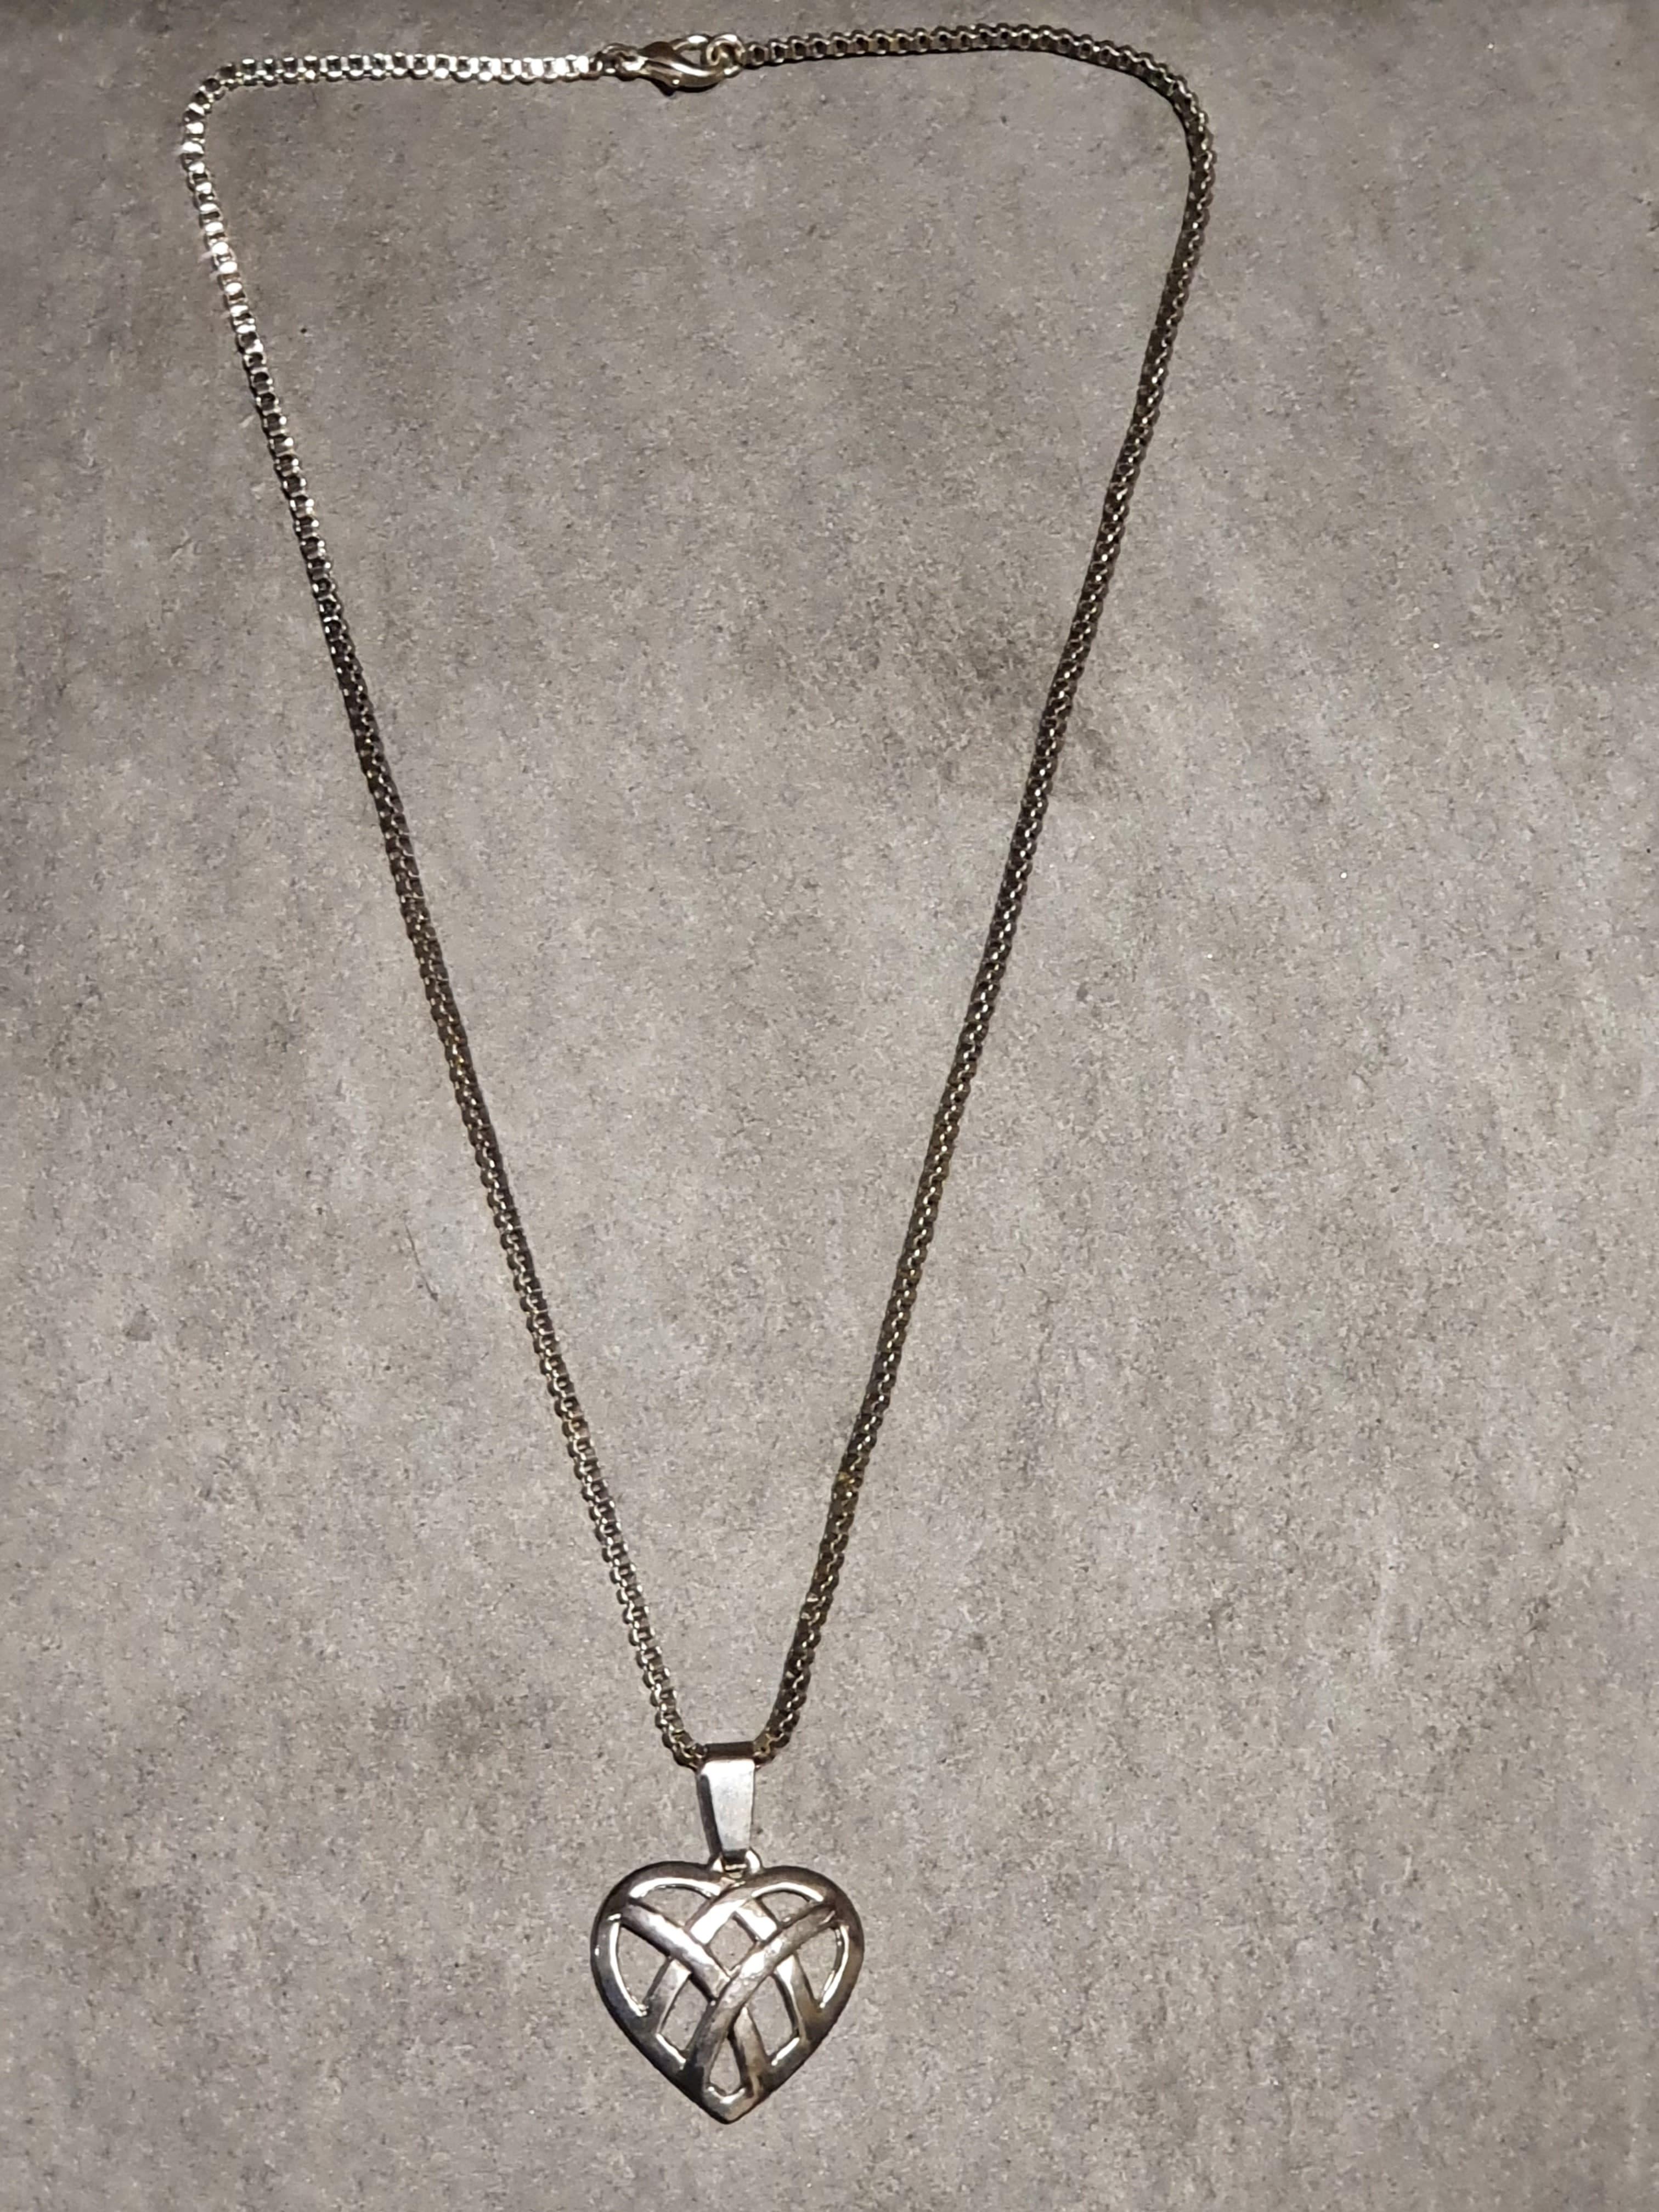 Celtic Necklace with Heart Design